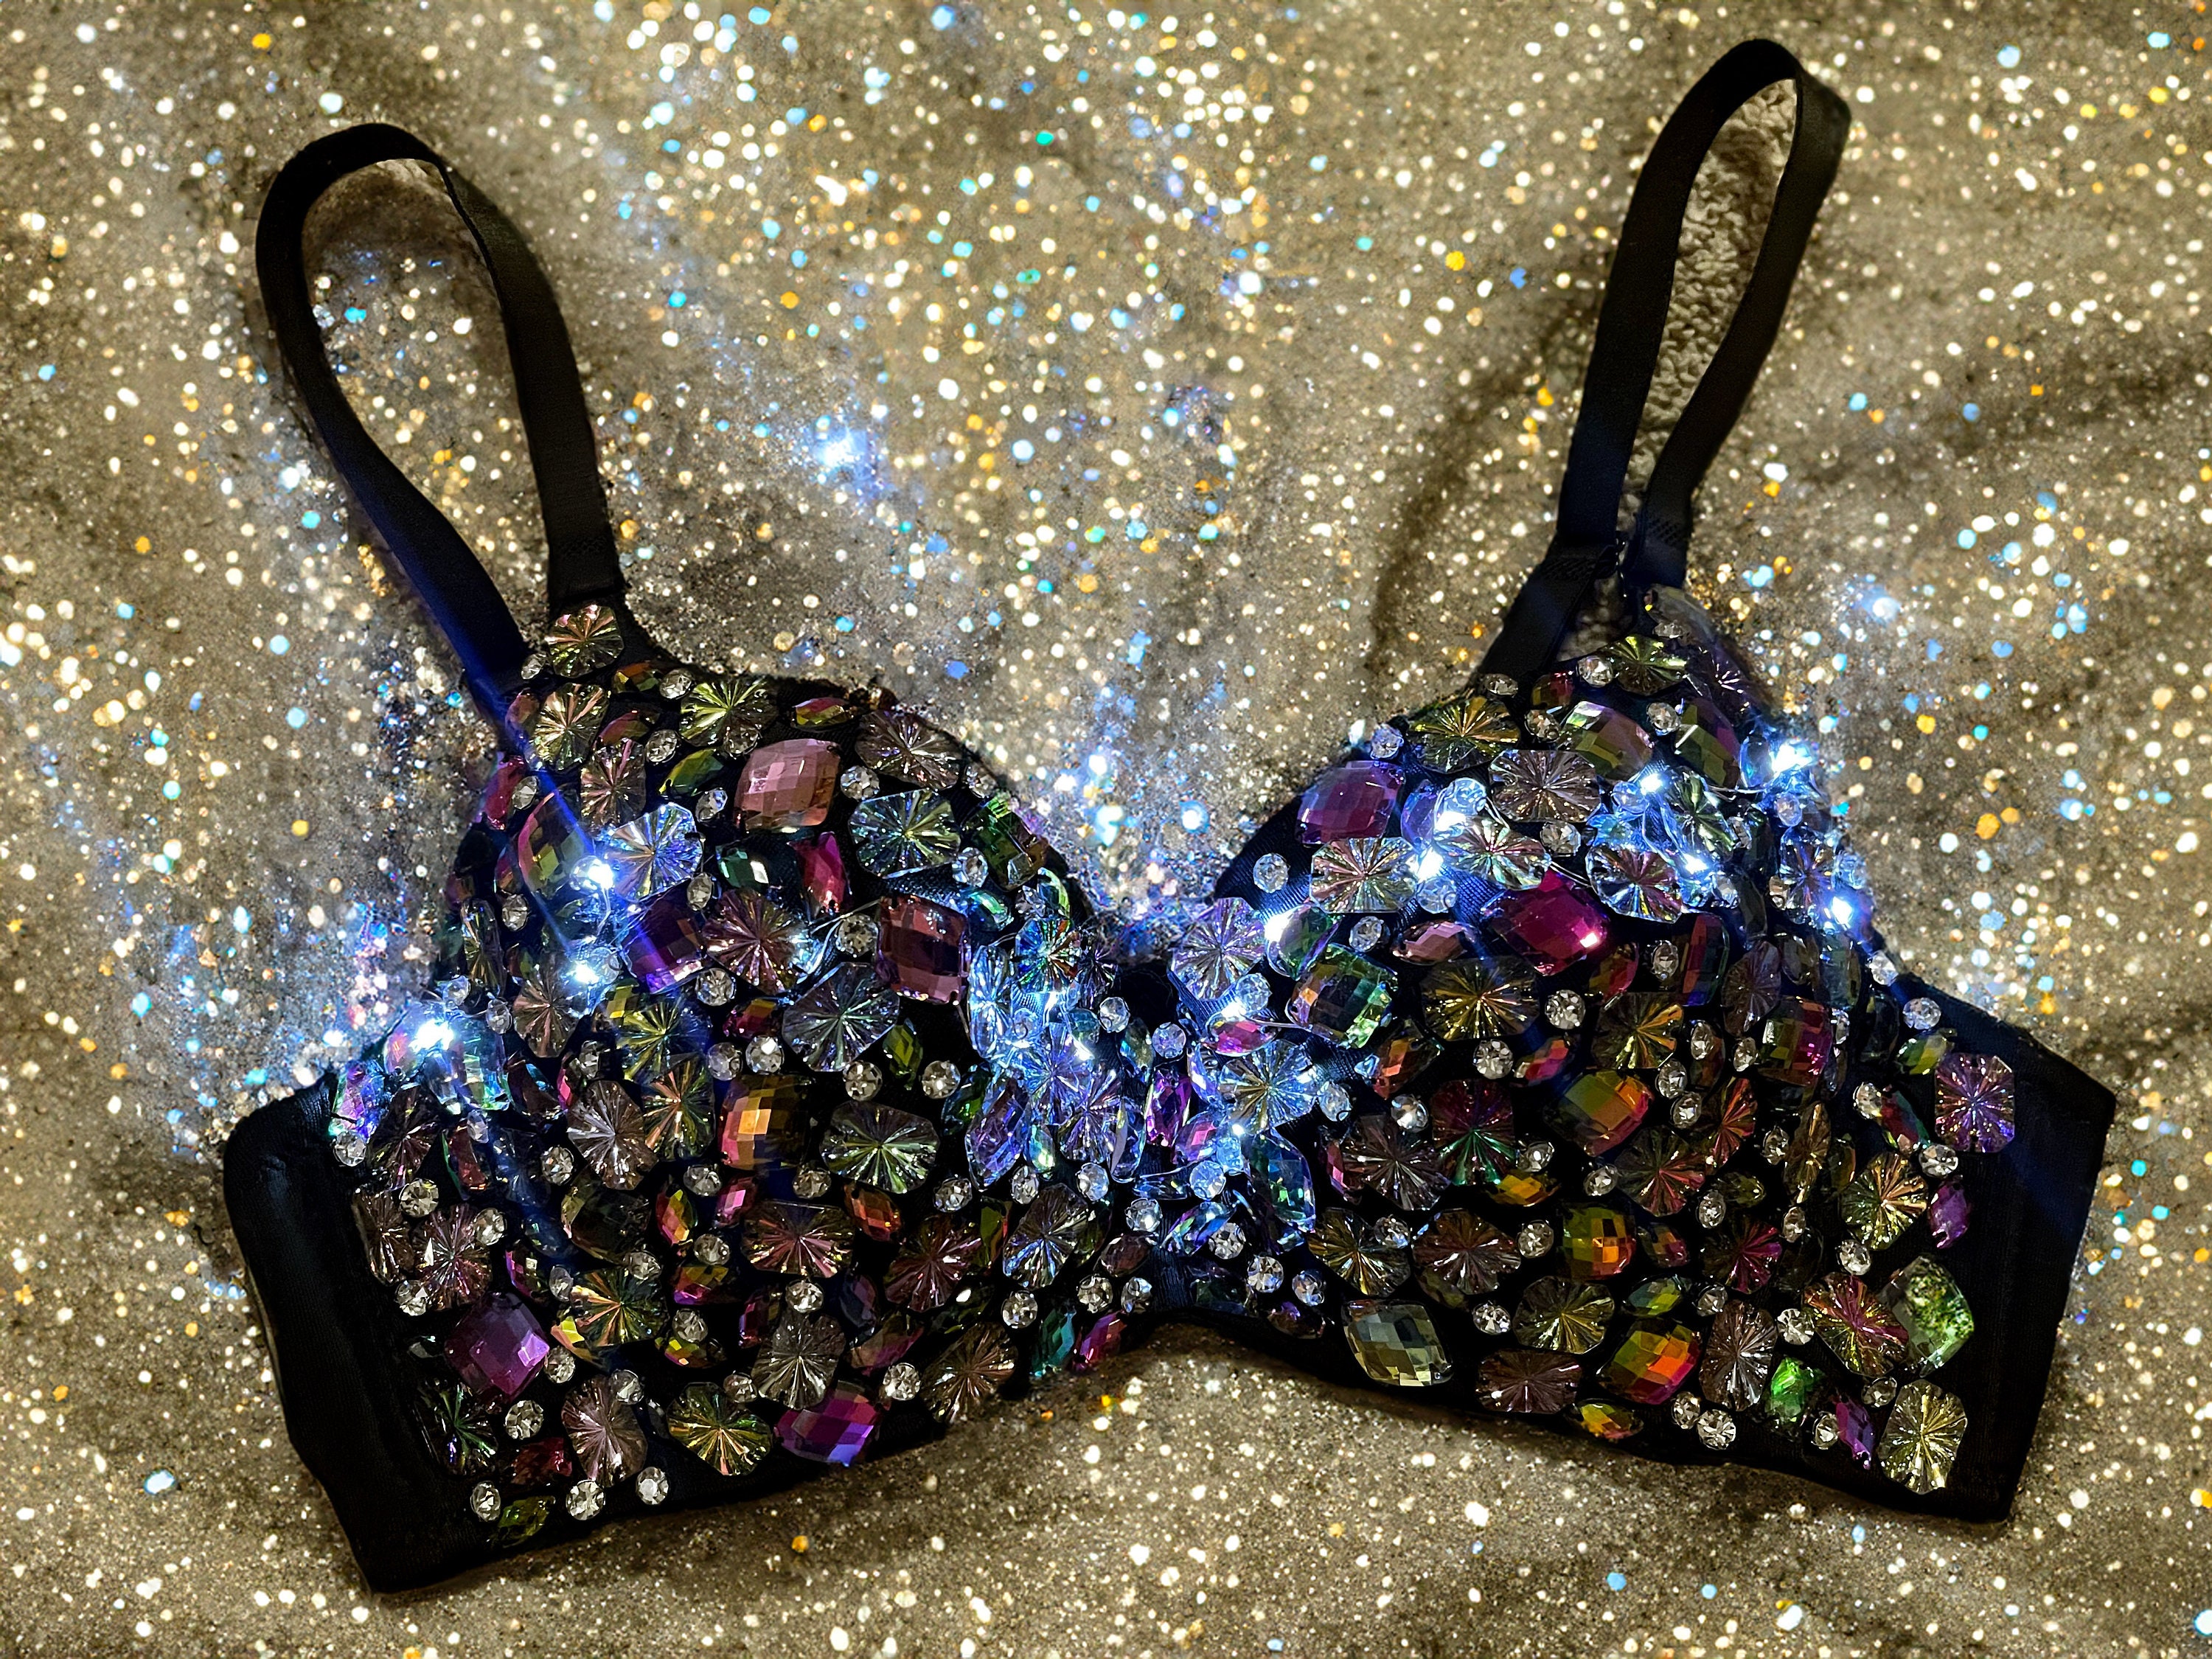 iHeartRaves EDC Sequin Rave Dance Bra Black, Red, or Pink Small 34A 32B 34B  32C